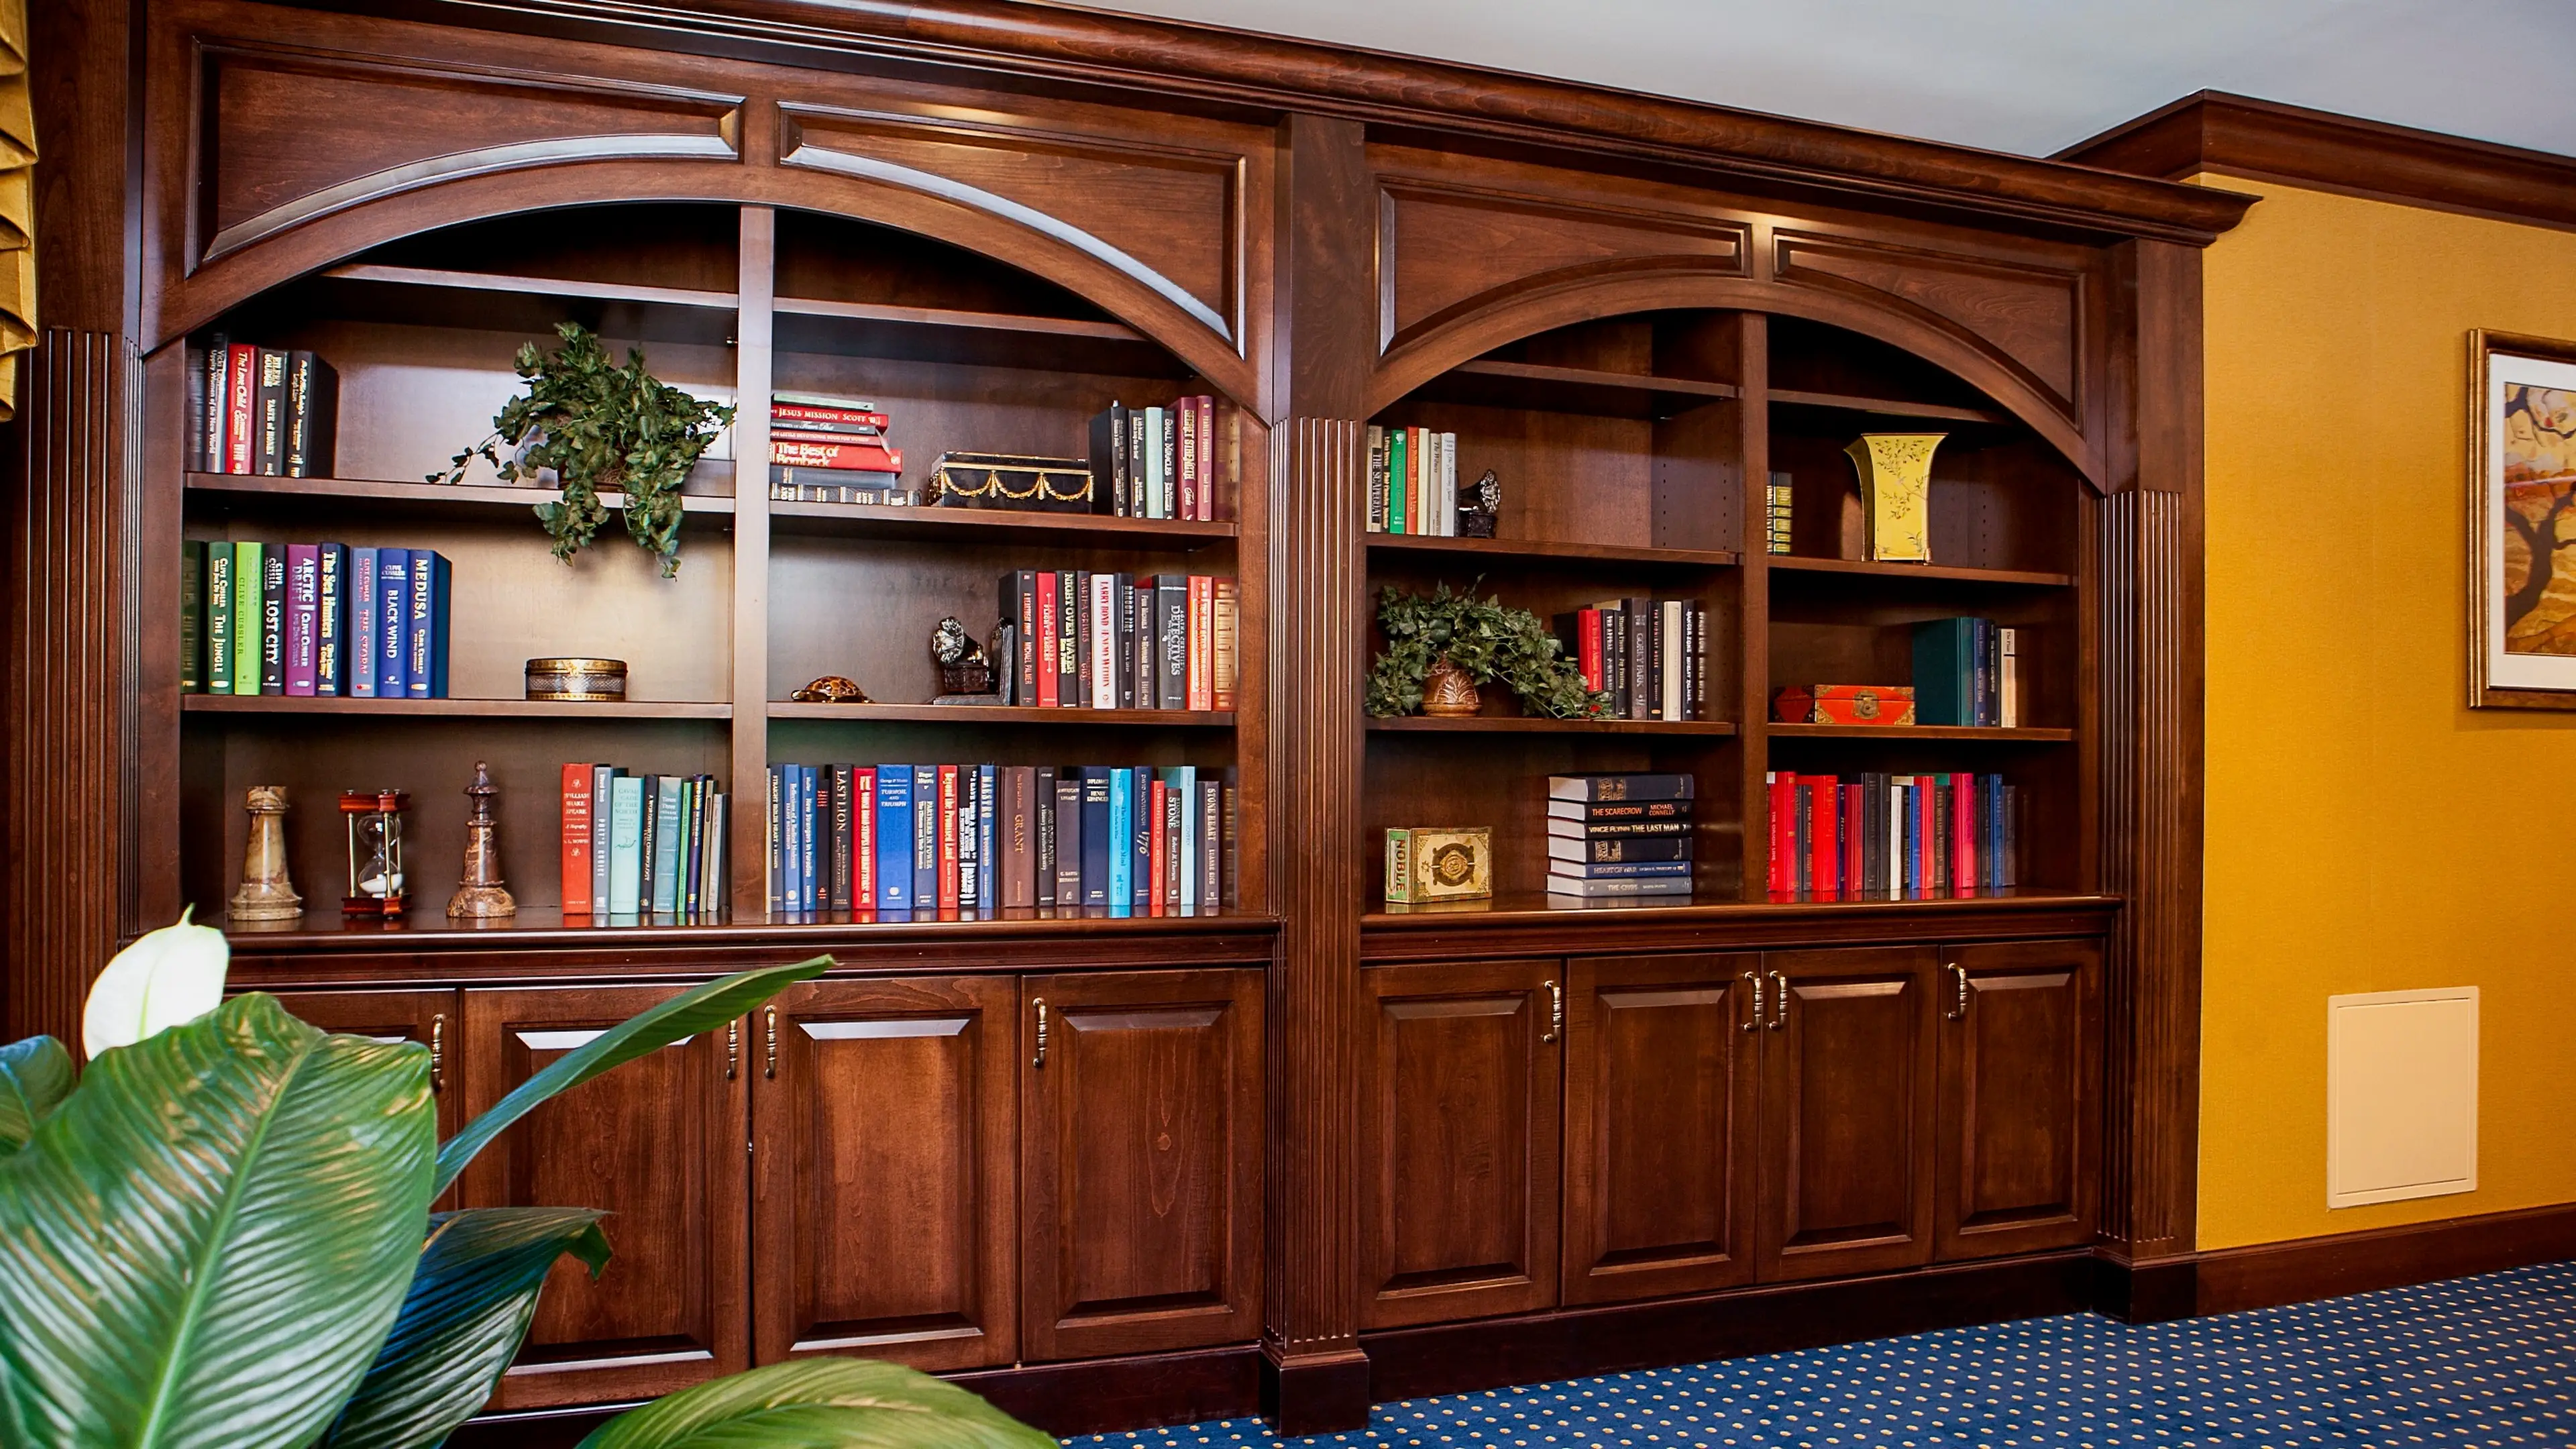 Litchfield bookcases in Serenade Library